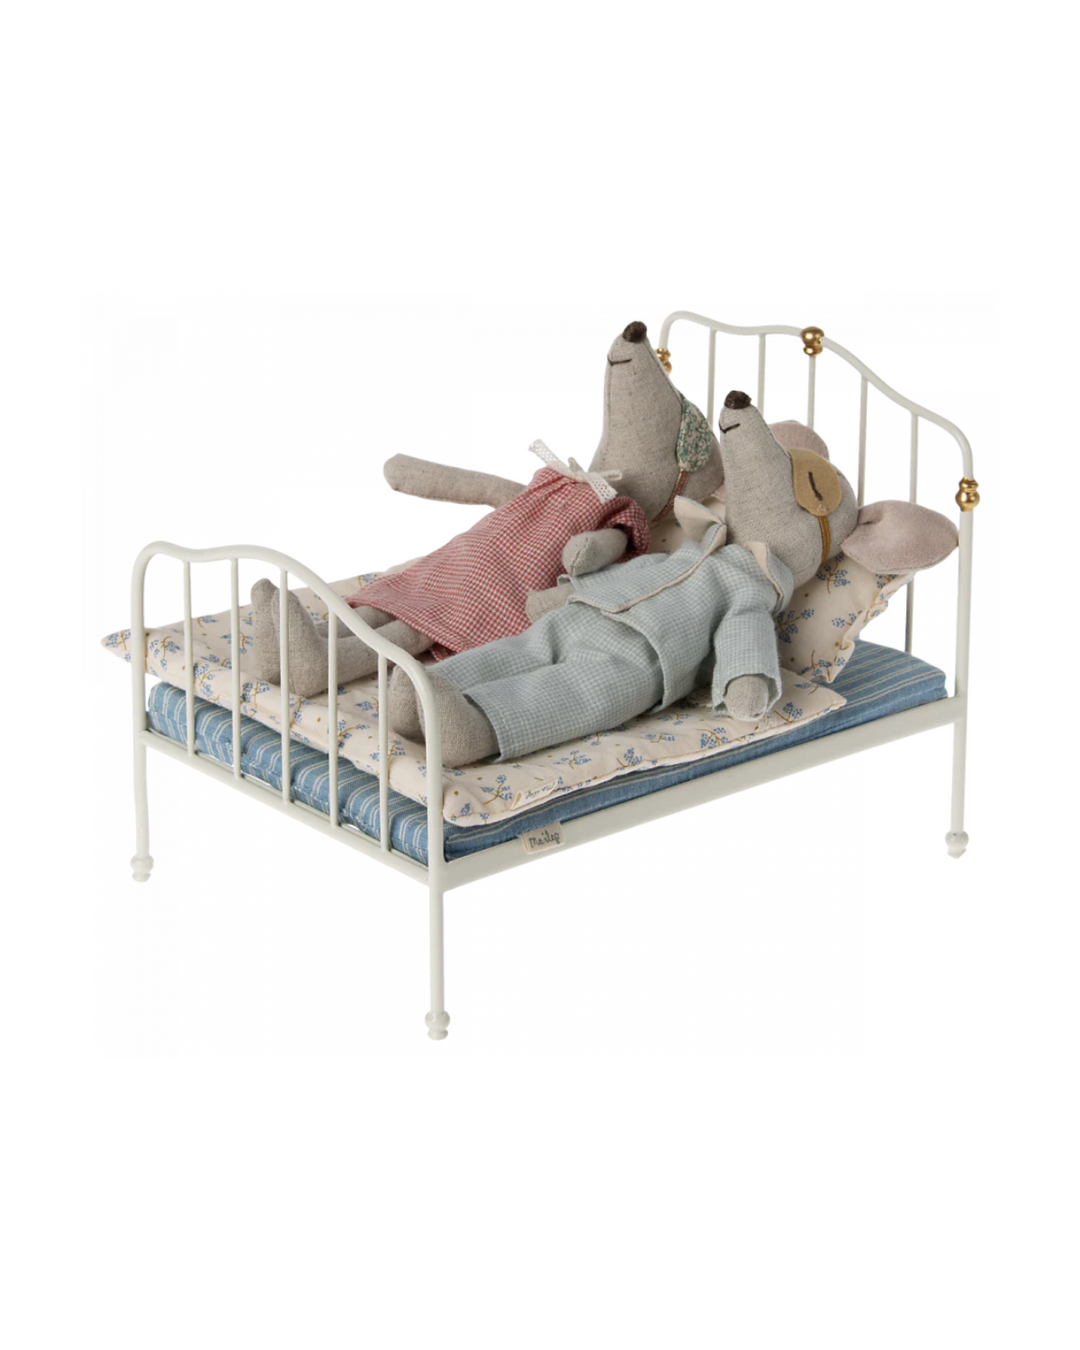 Off White Parent Mouse Bed - Charming Maileg Dollhouse Furniture